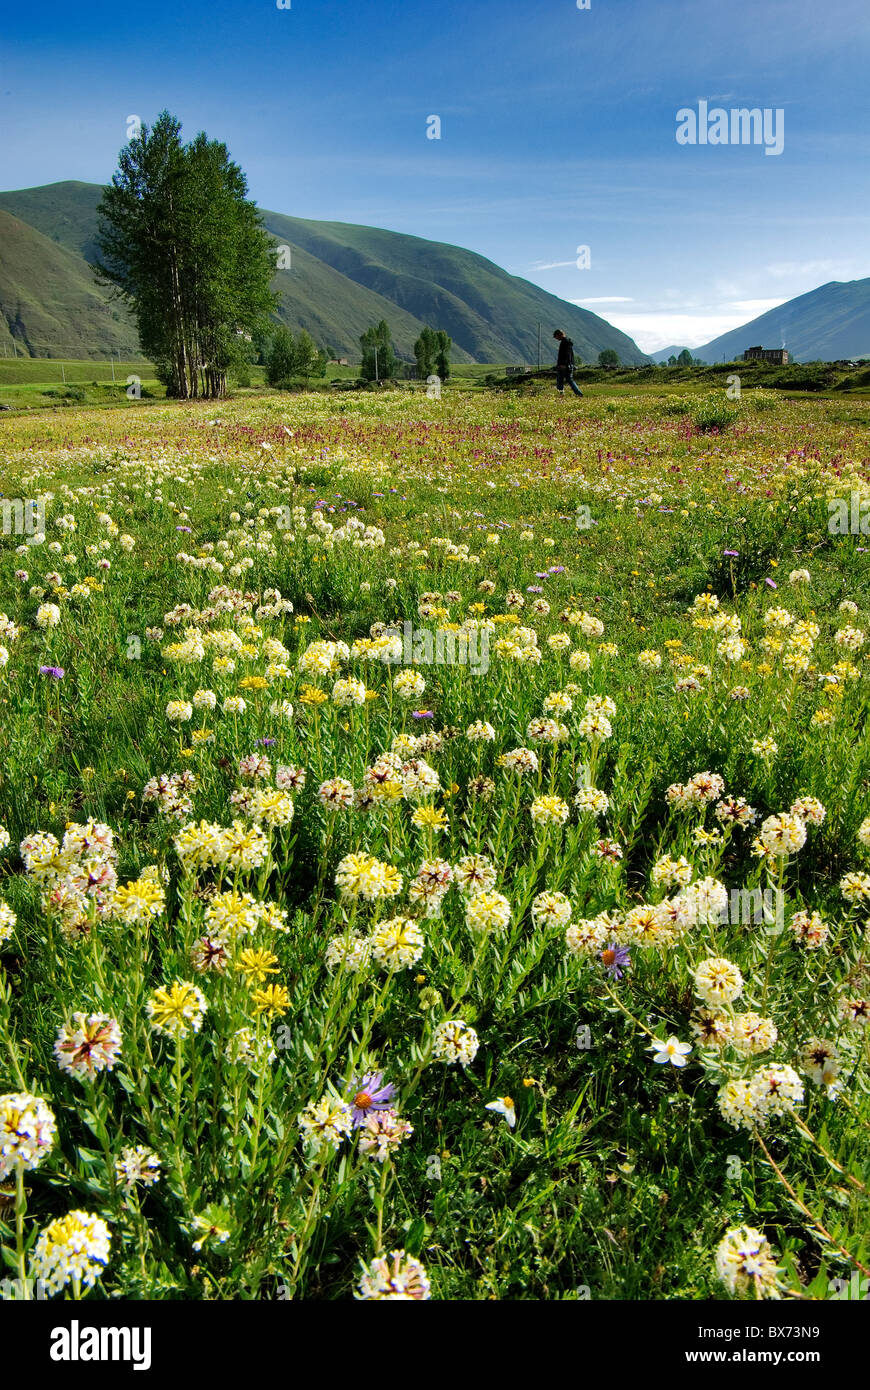 flowers in a mountain valley in sichuan, china Stock Photo